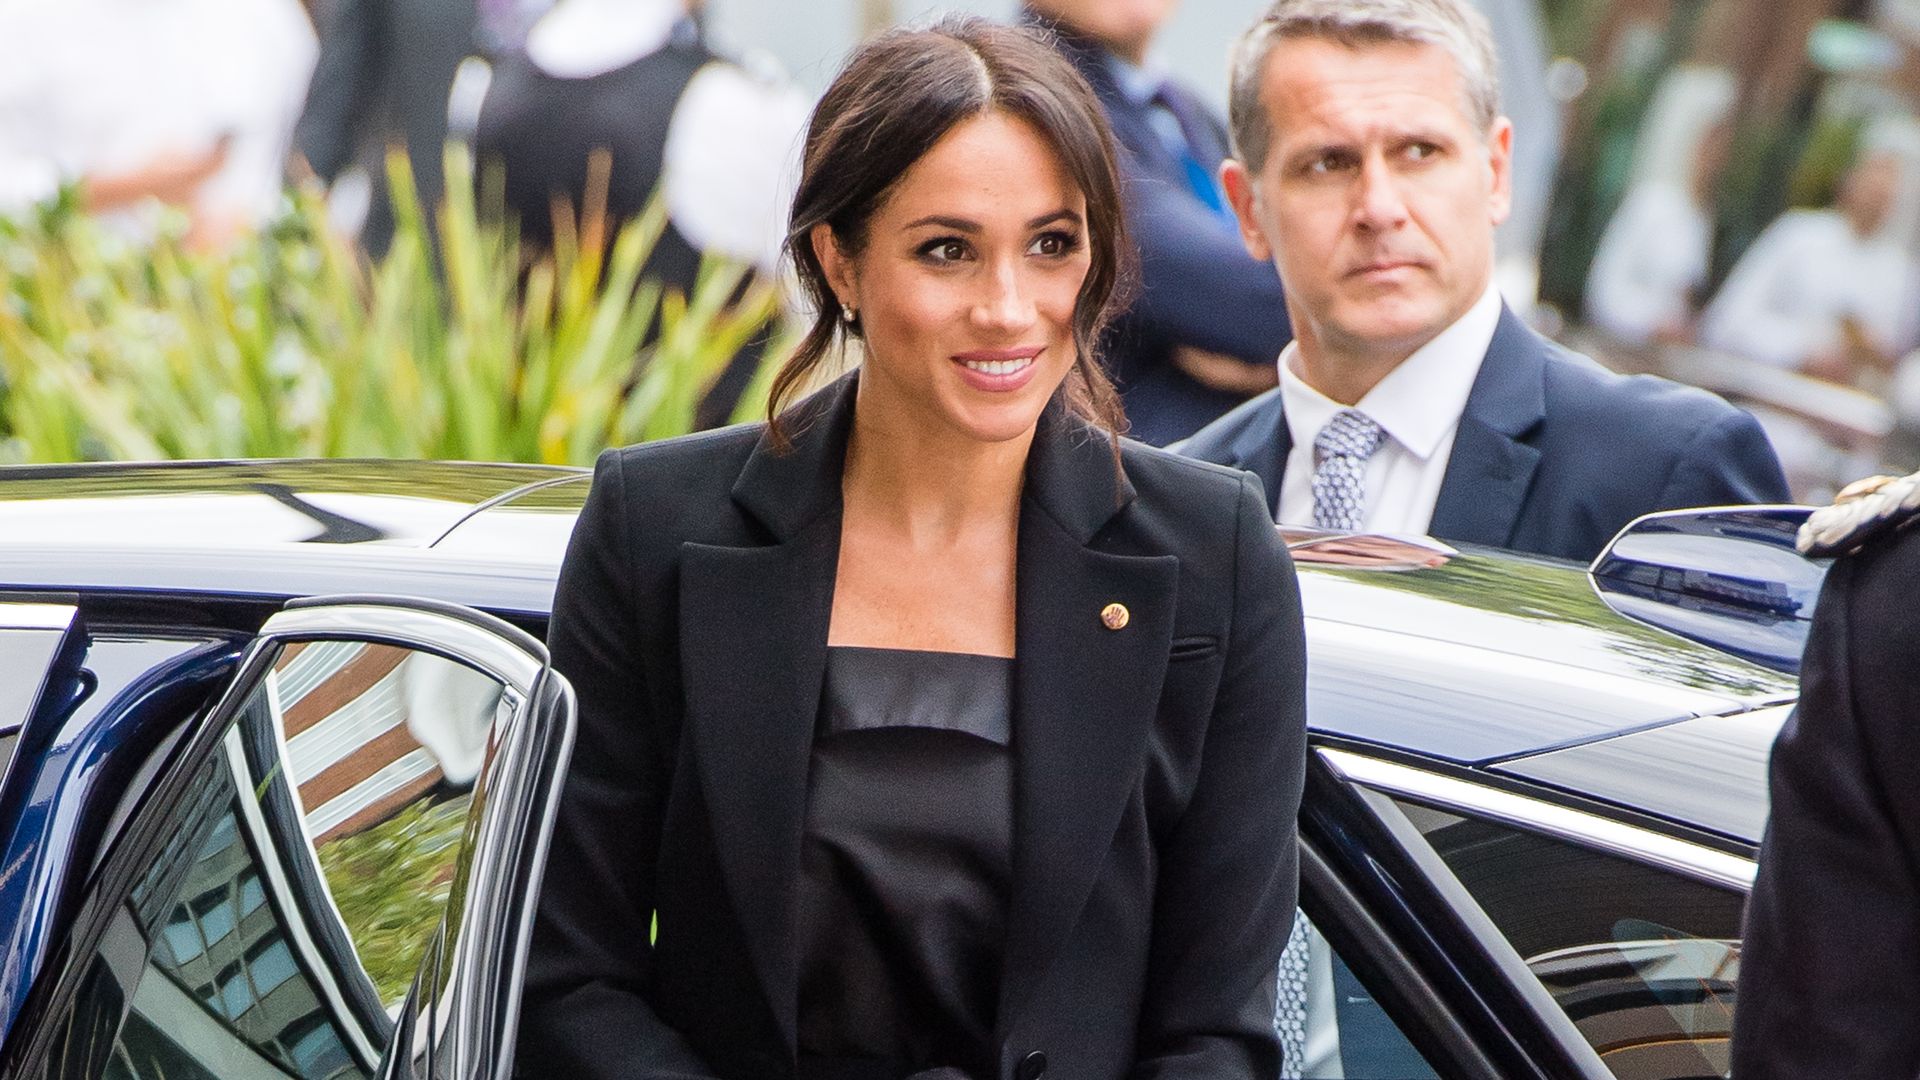 The Duchess of Sussex was spotted out and about in California